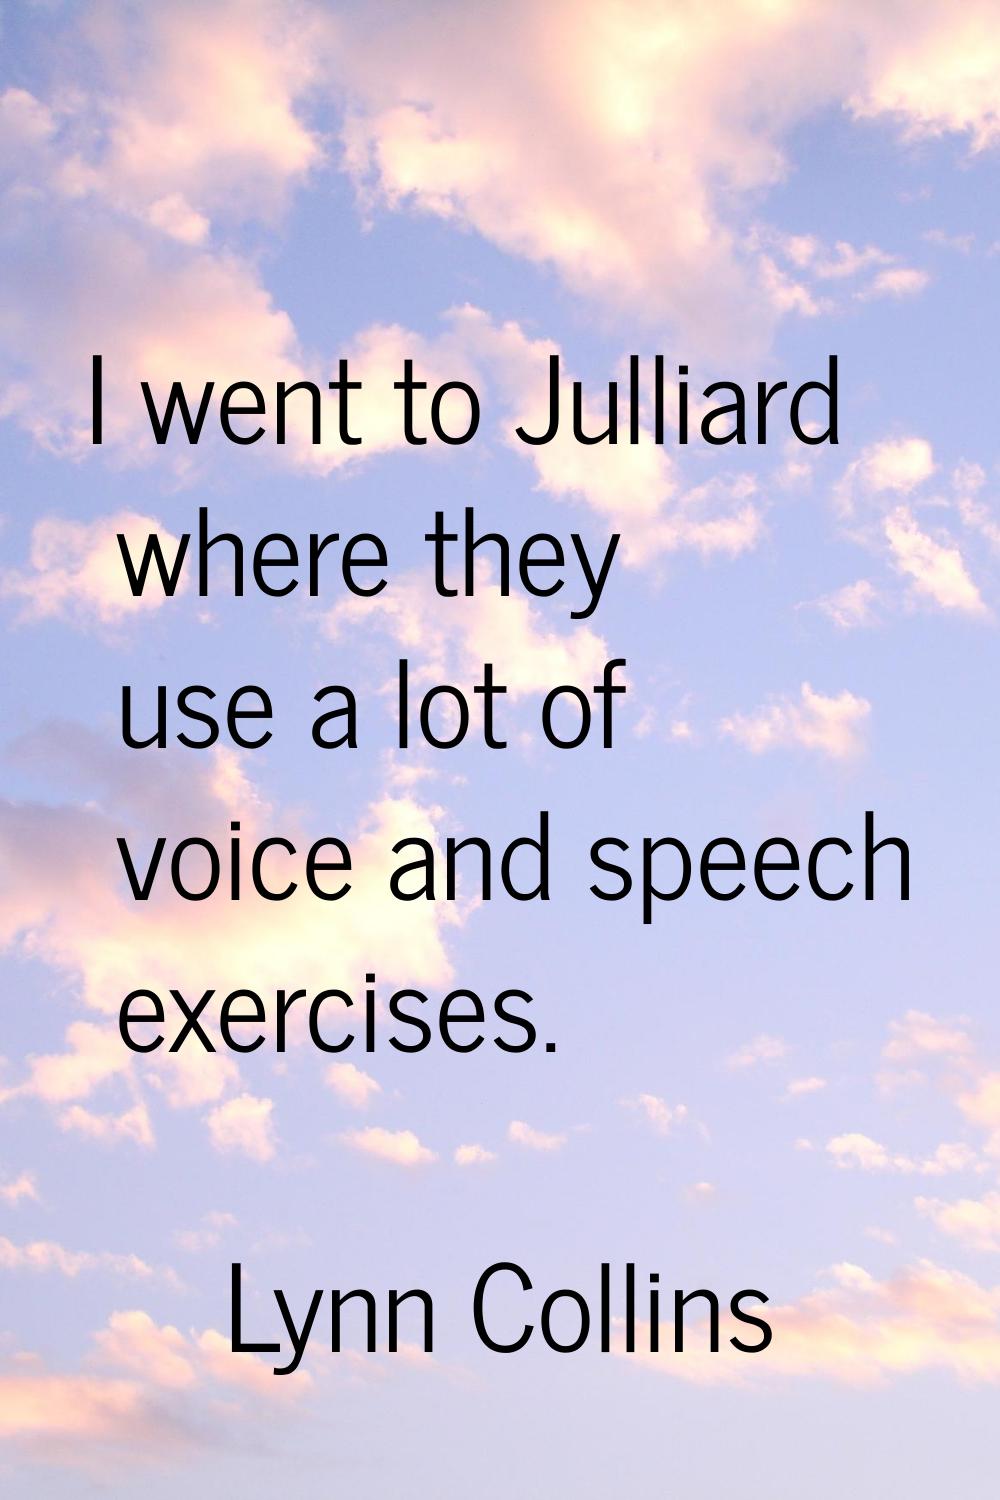 I went to Julliard where they use a lot of voice and speech exercises.